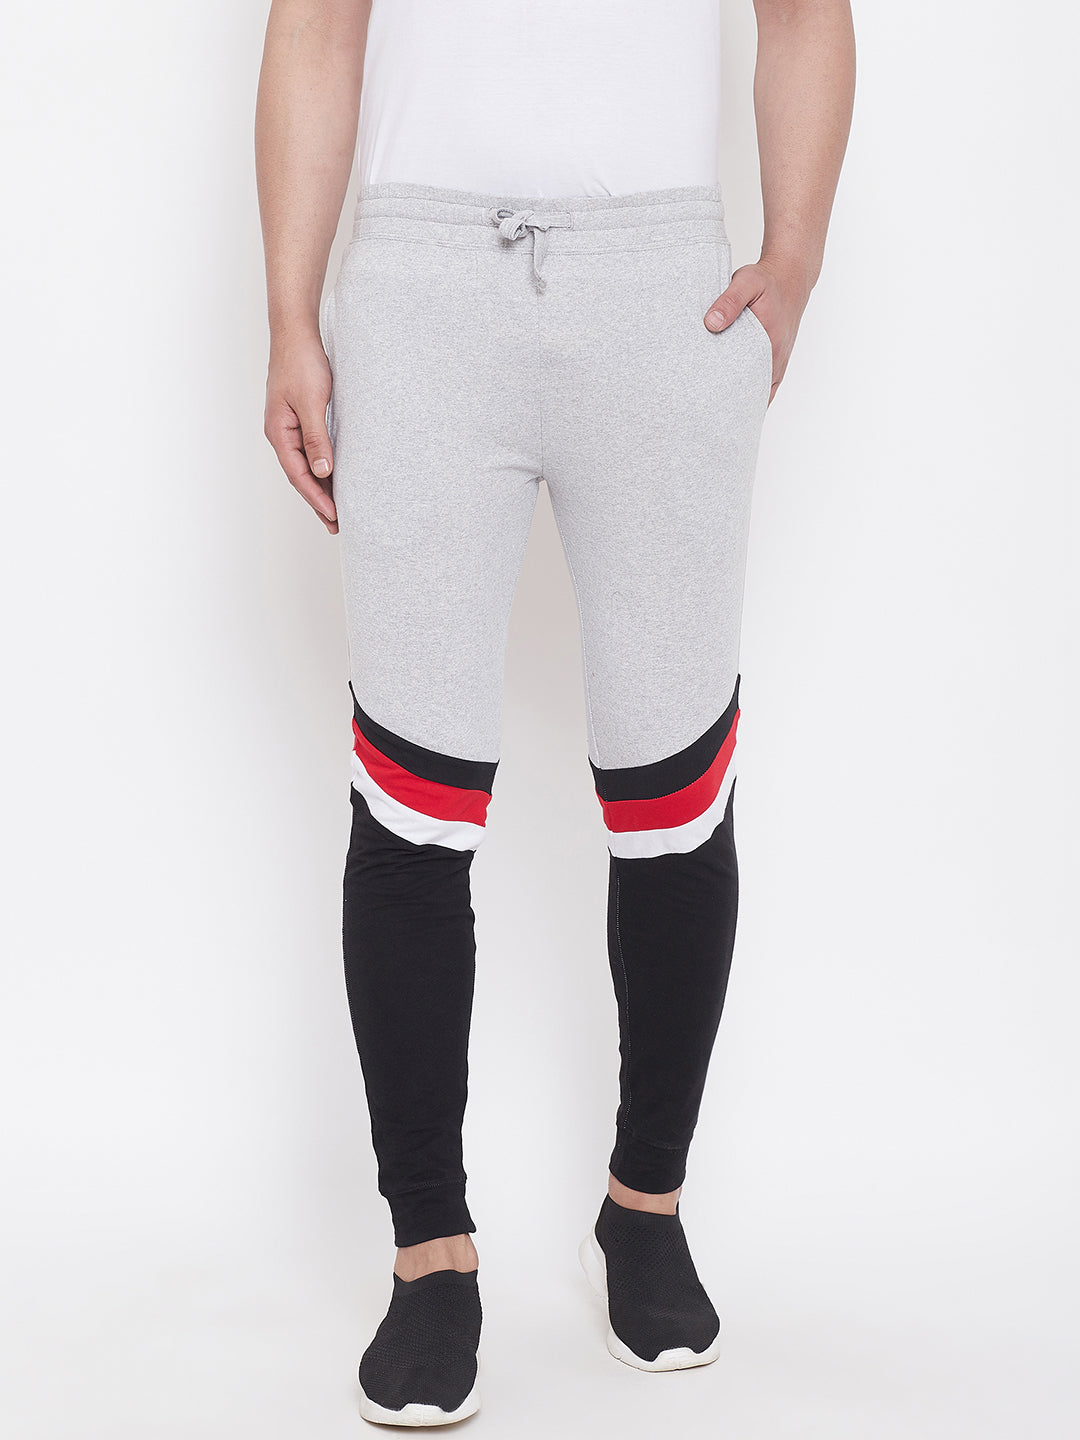 Grey Melange/Black/White/Red Mid - Rise Slim Fit Joggers With Color Block